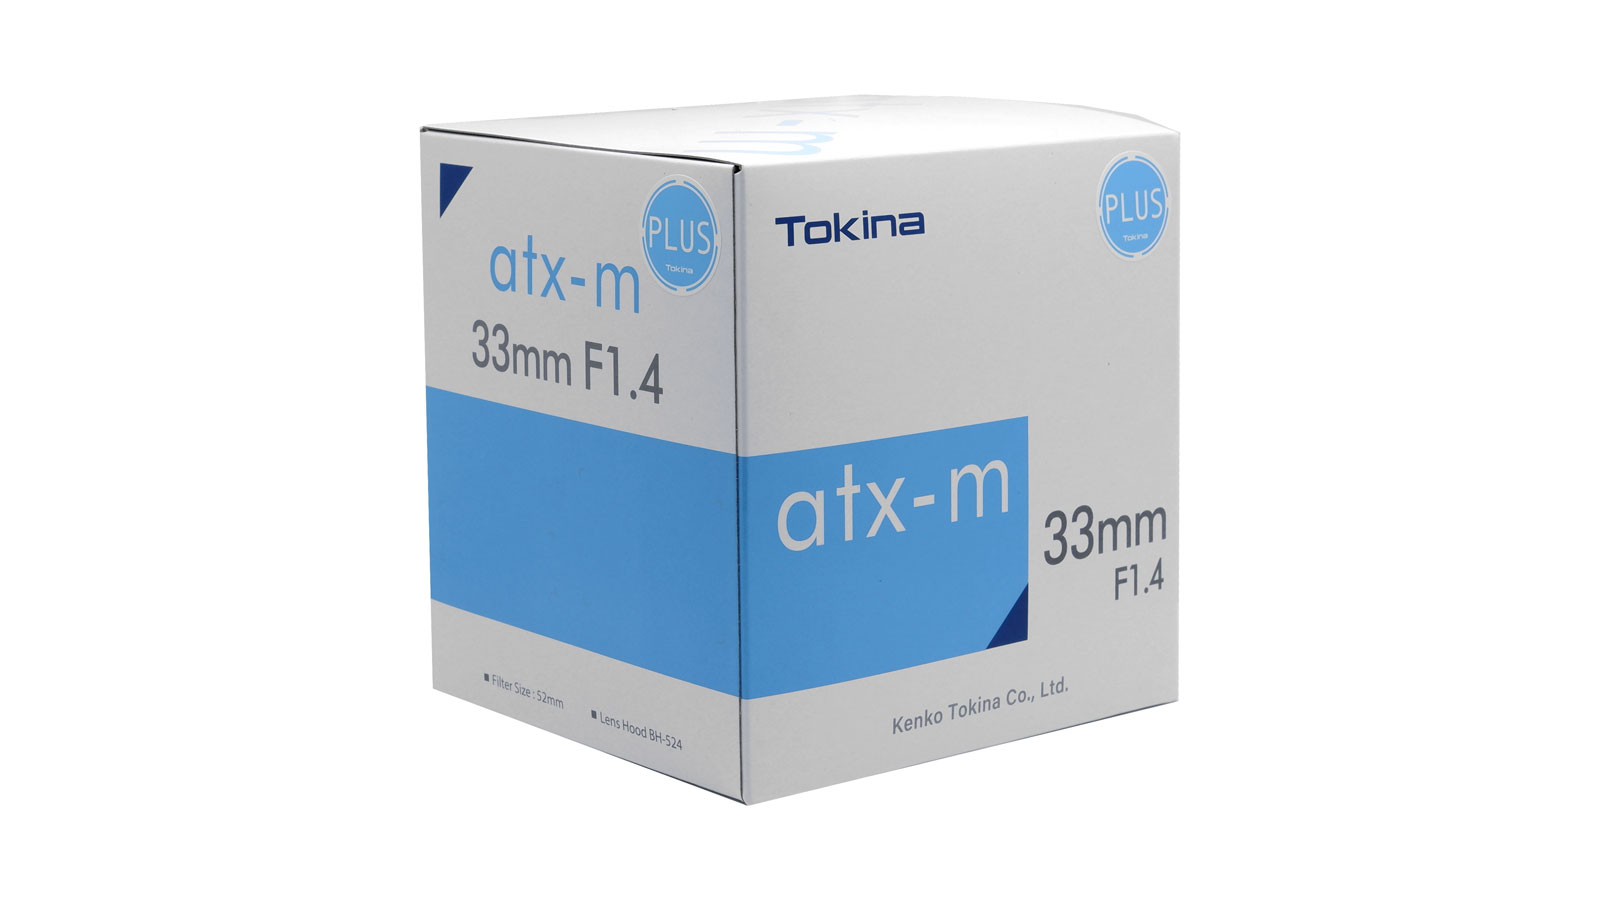 Tokina atx-m series package with "PLUS" seal.